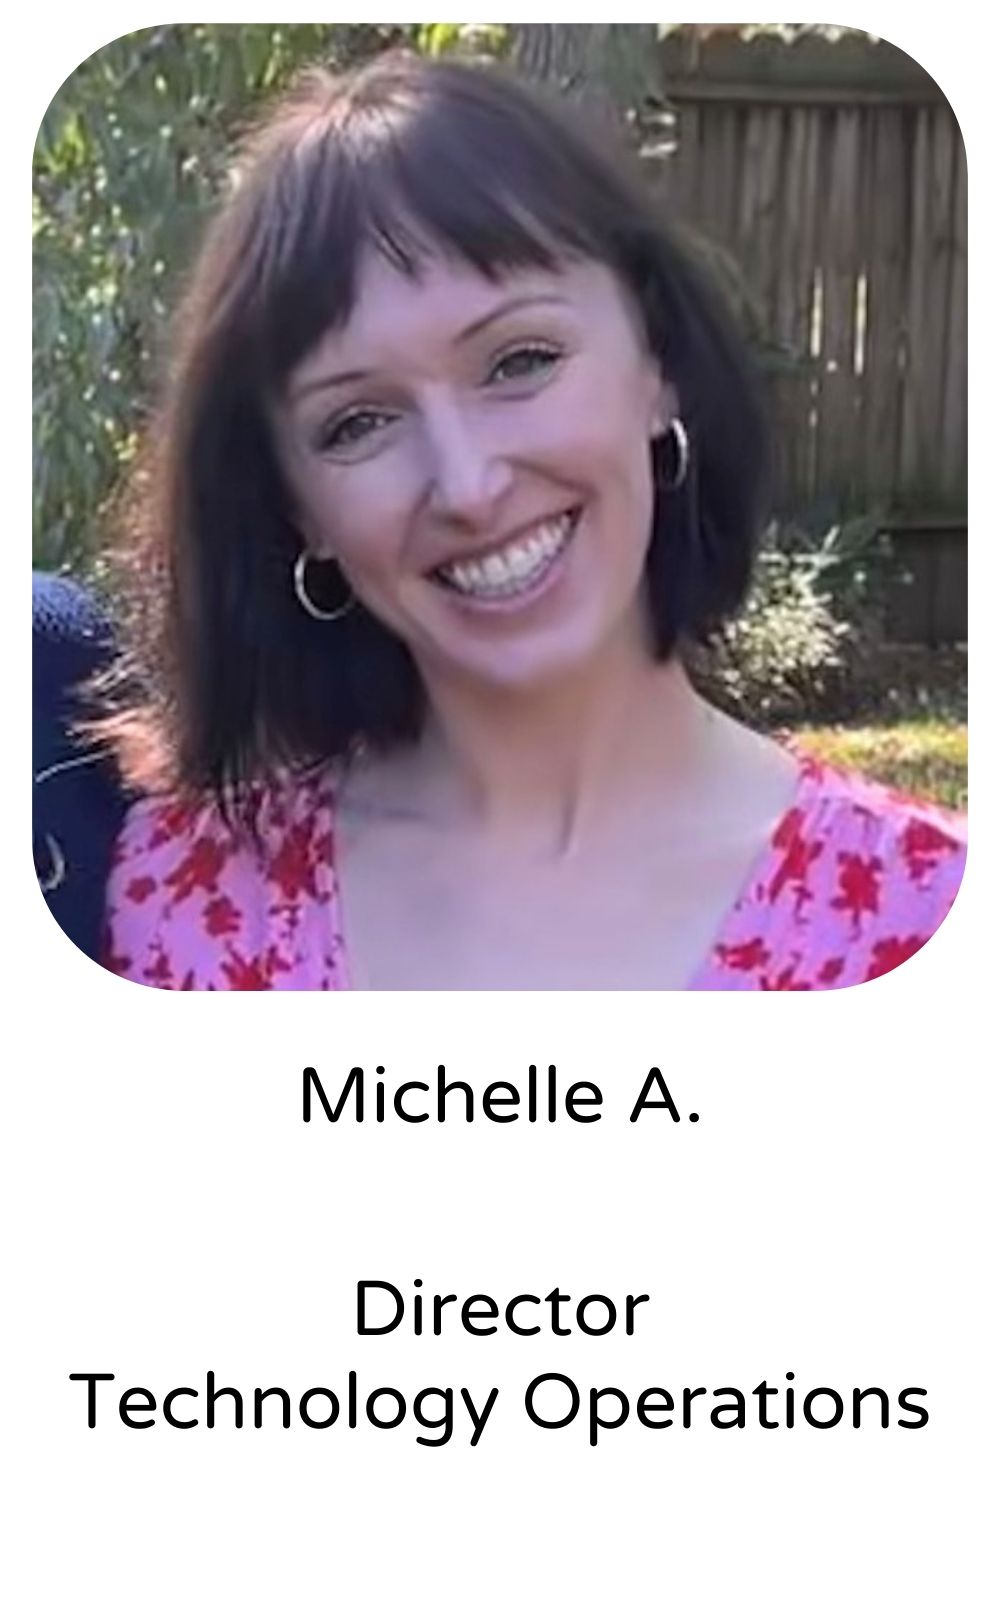 Michelle A, Director, Technology Operations